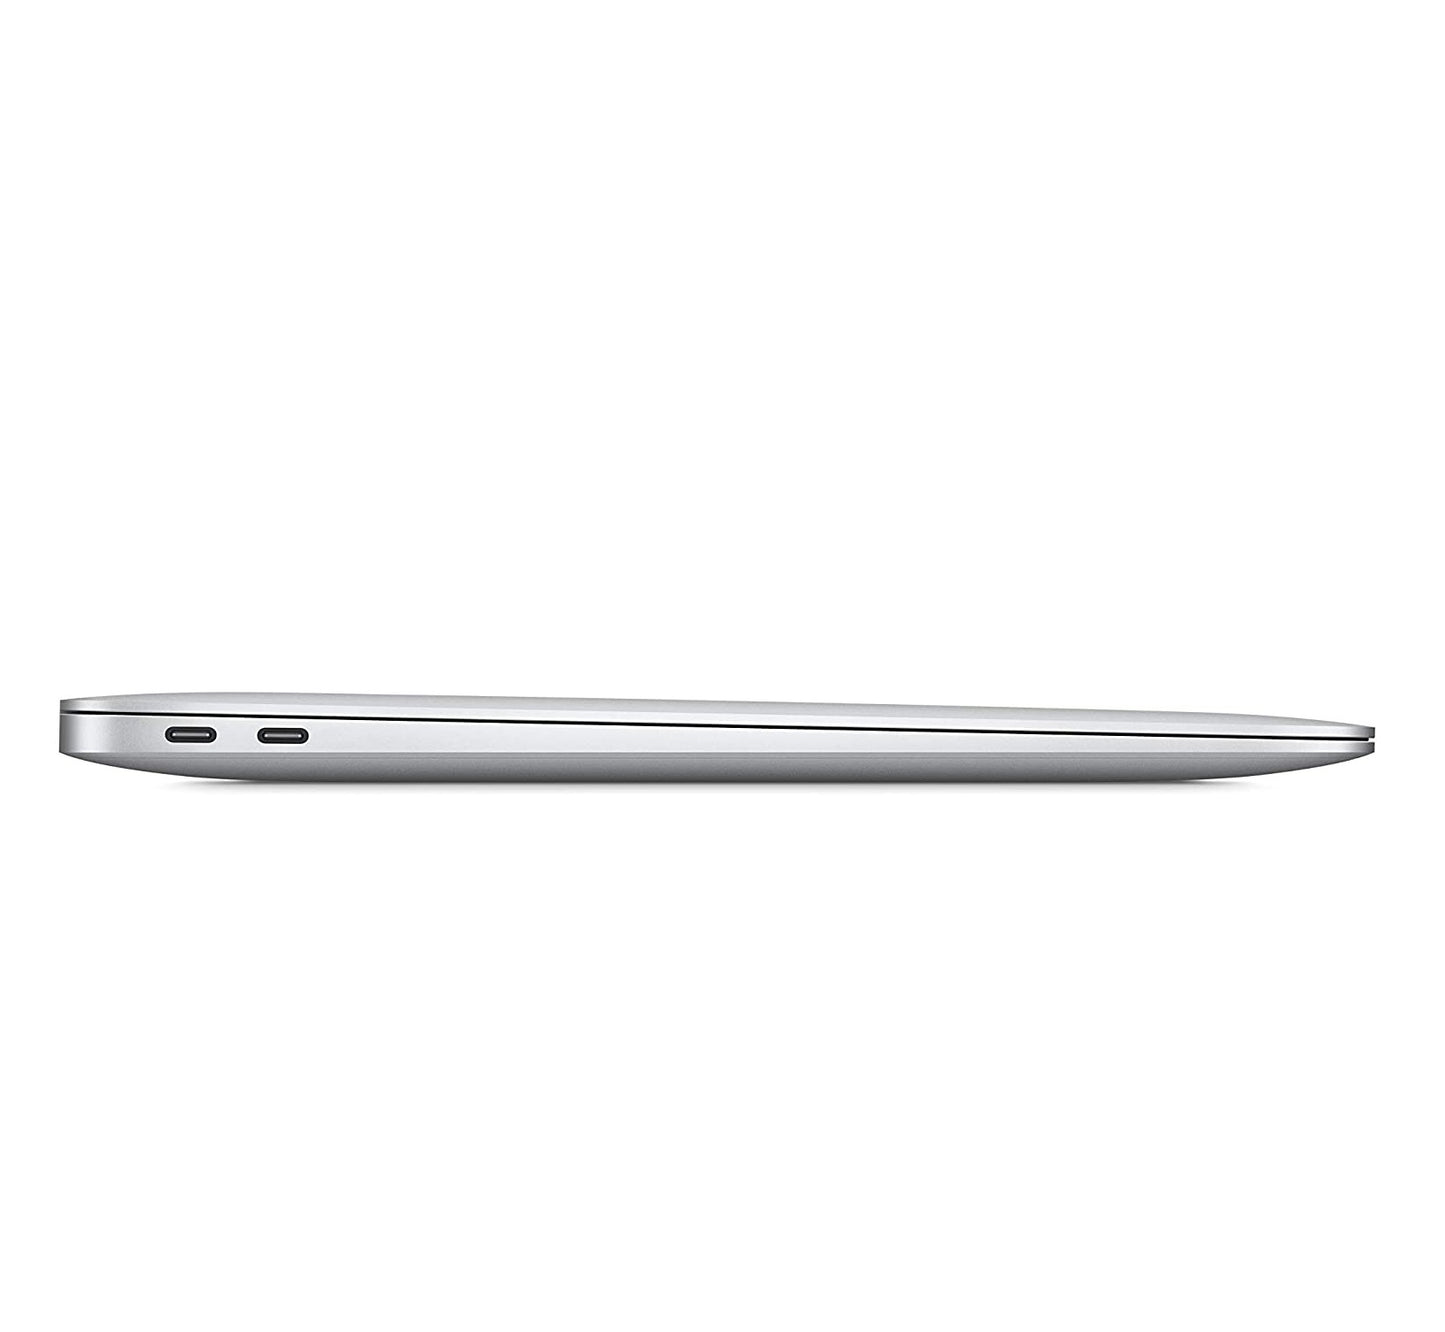 Apple MacBook Air 2020, With 13.3-Inch, M1 Chip With 8-Core CPU And 7-Core GPU/8GB RAM/256GB SSD